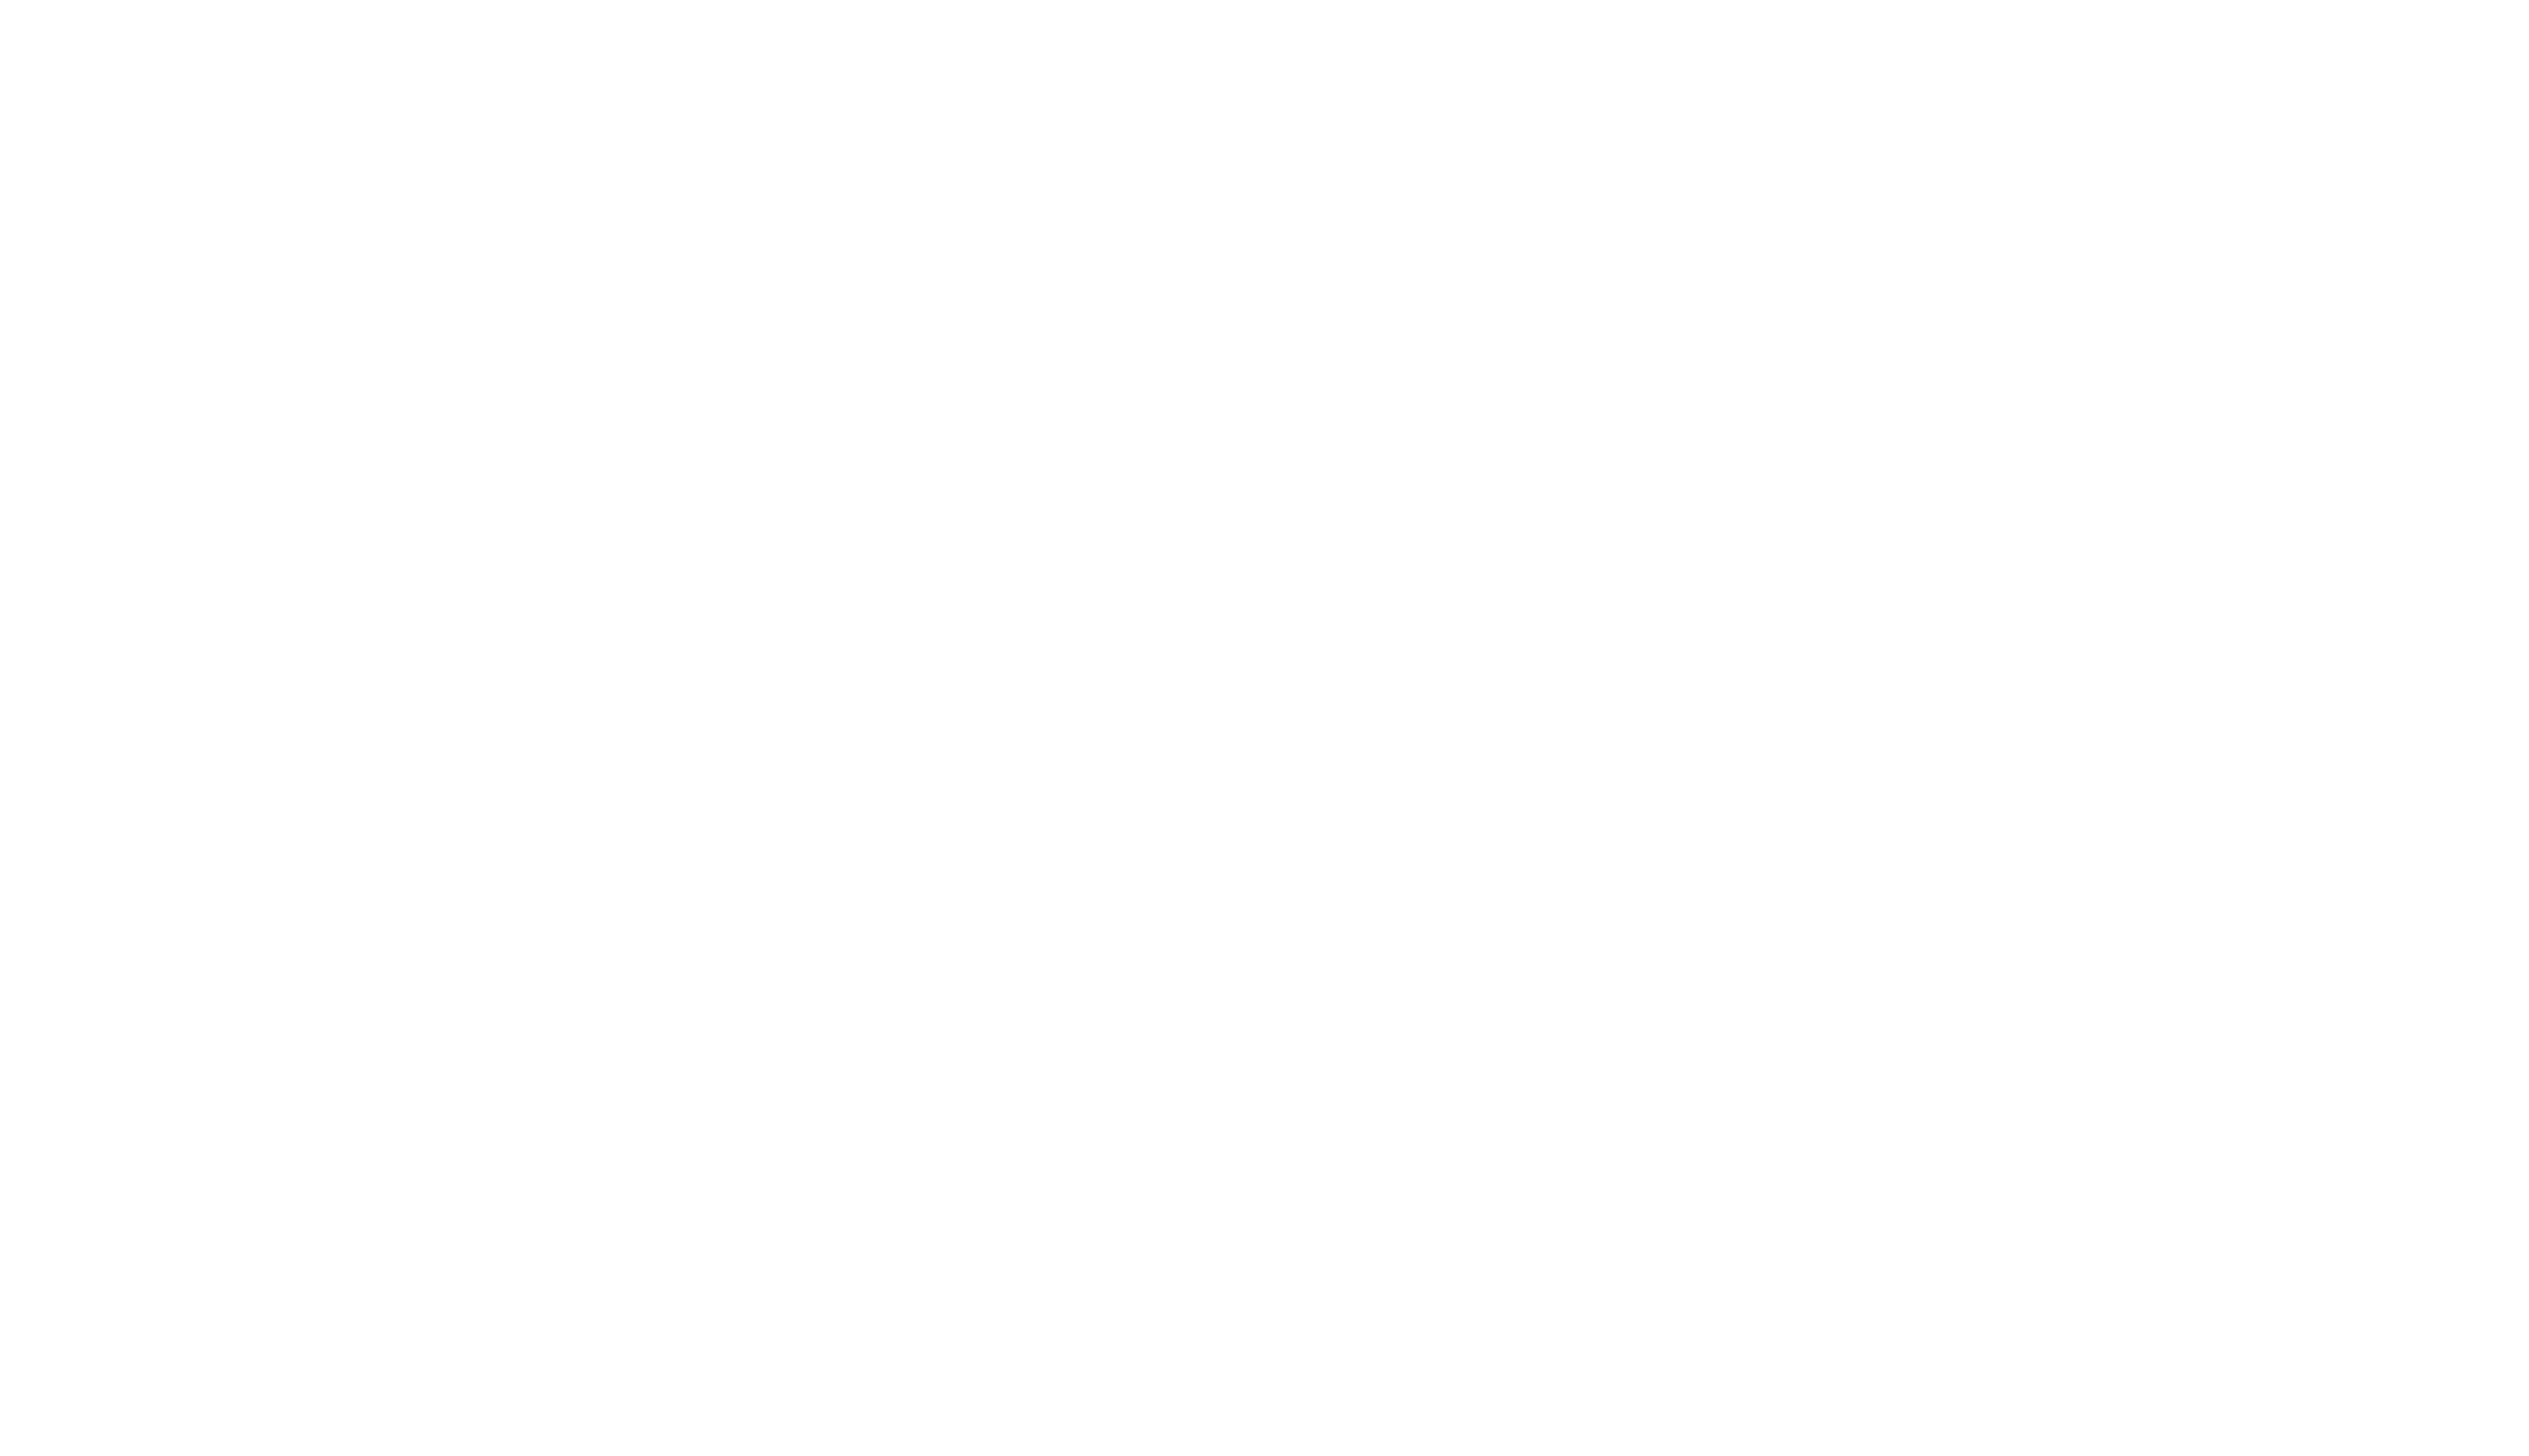 MAKING THE WORLD A HEALTHIER AND HAPPIER PLACE FOR ALL.